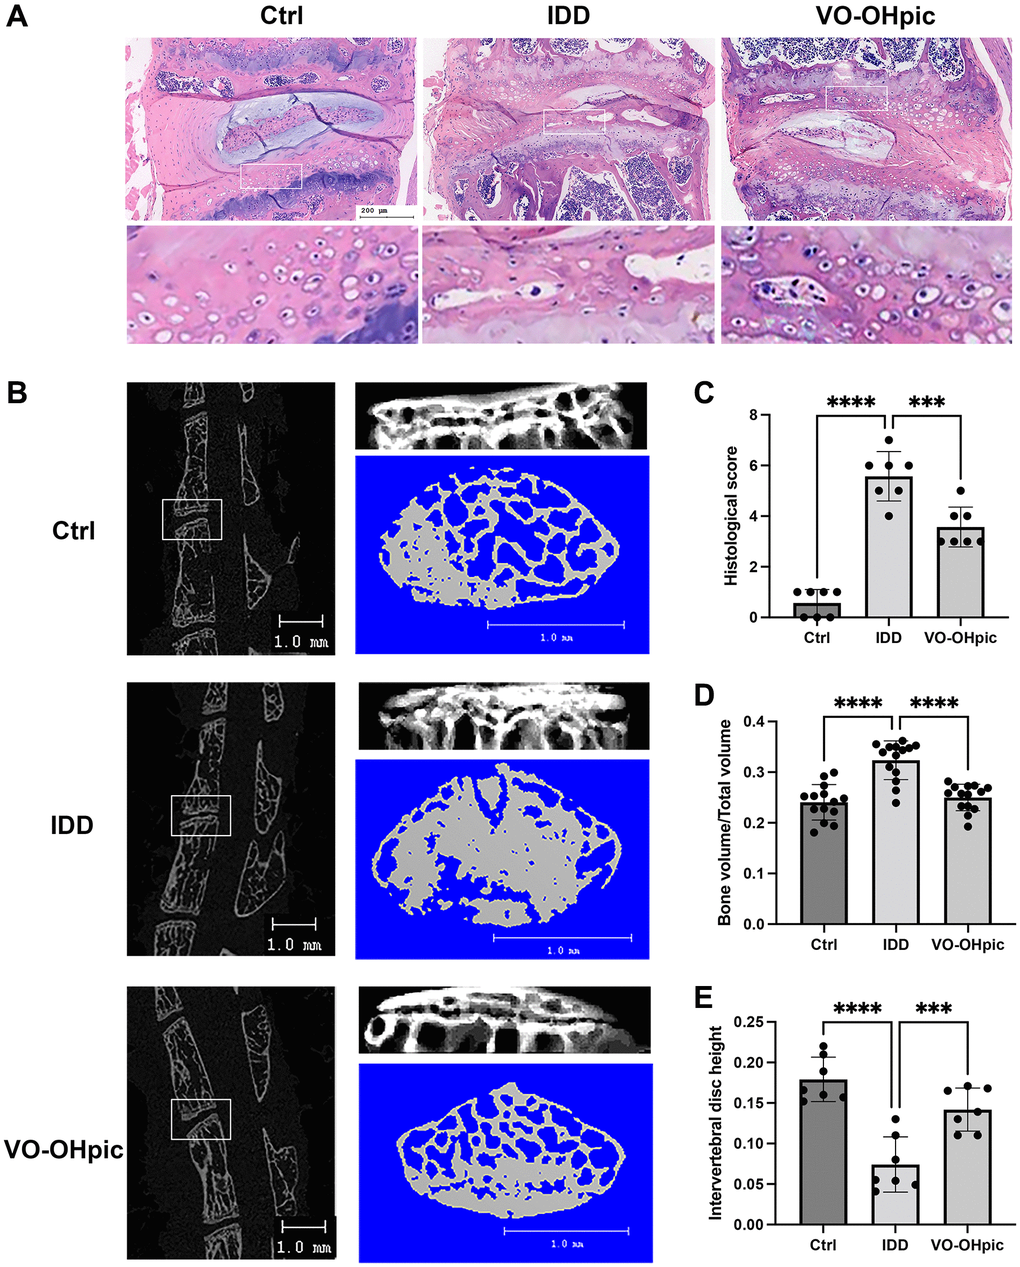 VO-OHpic significantly ameliorated IDD progression and cartilage endplate calcification in vivo. (A) HE staining of L4/5 intervertebral discs in Ctrl group, IDD group and IDD+VO-OHpic group. Scale bar = 200 μm. (B) Micro-CT analysis of L4/5 segments and cartilage endplate. Scale bar = 1 mm. (C) Histological score of the L4–5 segments of the lumbar spine among the three groups. (D) Quantification of cartilage endplate calcification via microarchitecture parameters (bone volume per tissue volume (BV/TV)). (E) Histomorphometric assessment of the intervertebral disc height. The disc height was calculated by the average of the anterior, middle and posterior of intervertebral disc. Data are presented as mean ± SD (n = 7/group). ***P ****P 